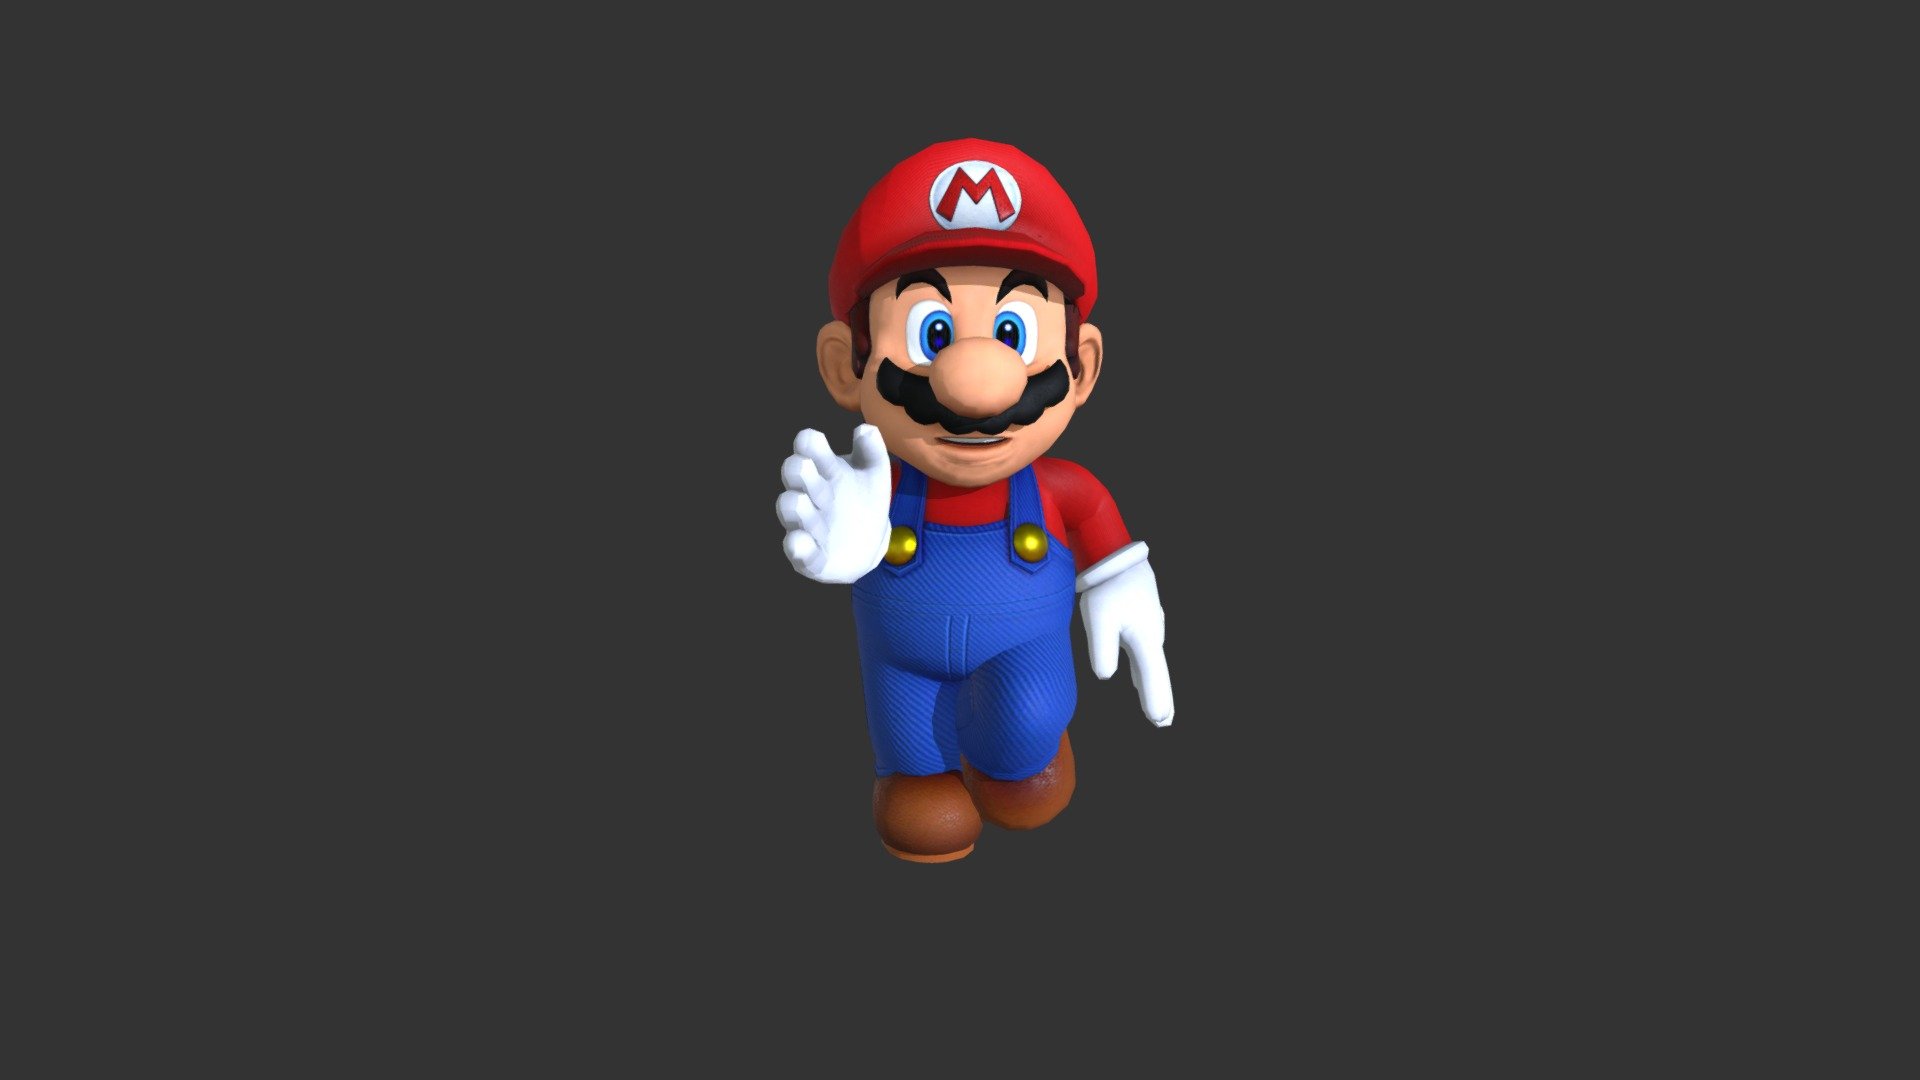 Rigged and animated Mario 3D model.

Run in place animation 3d model